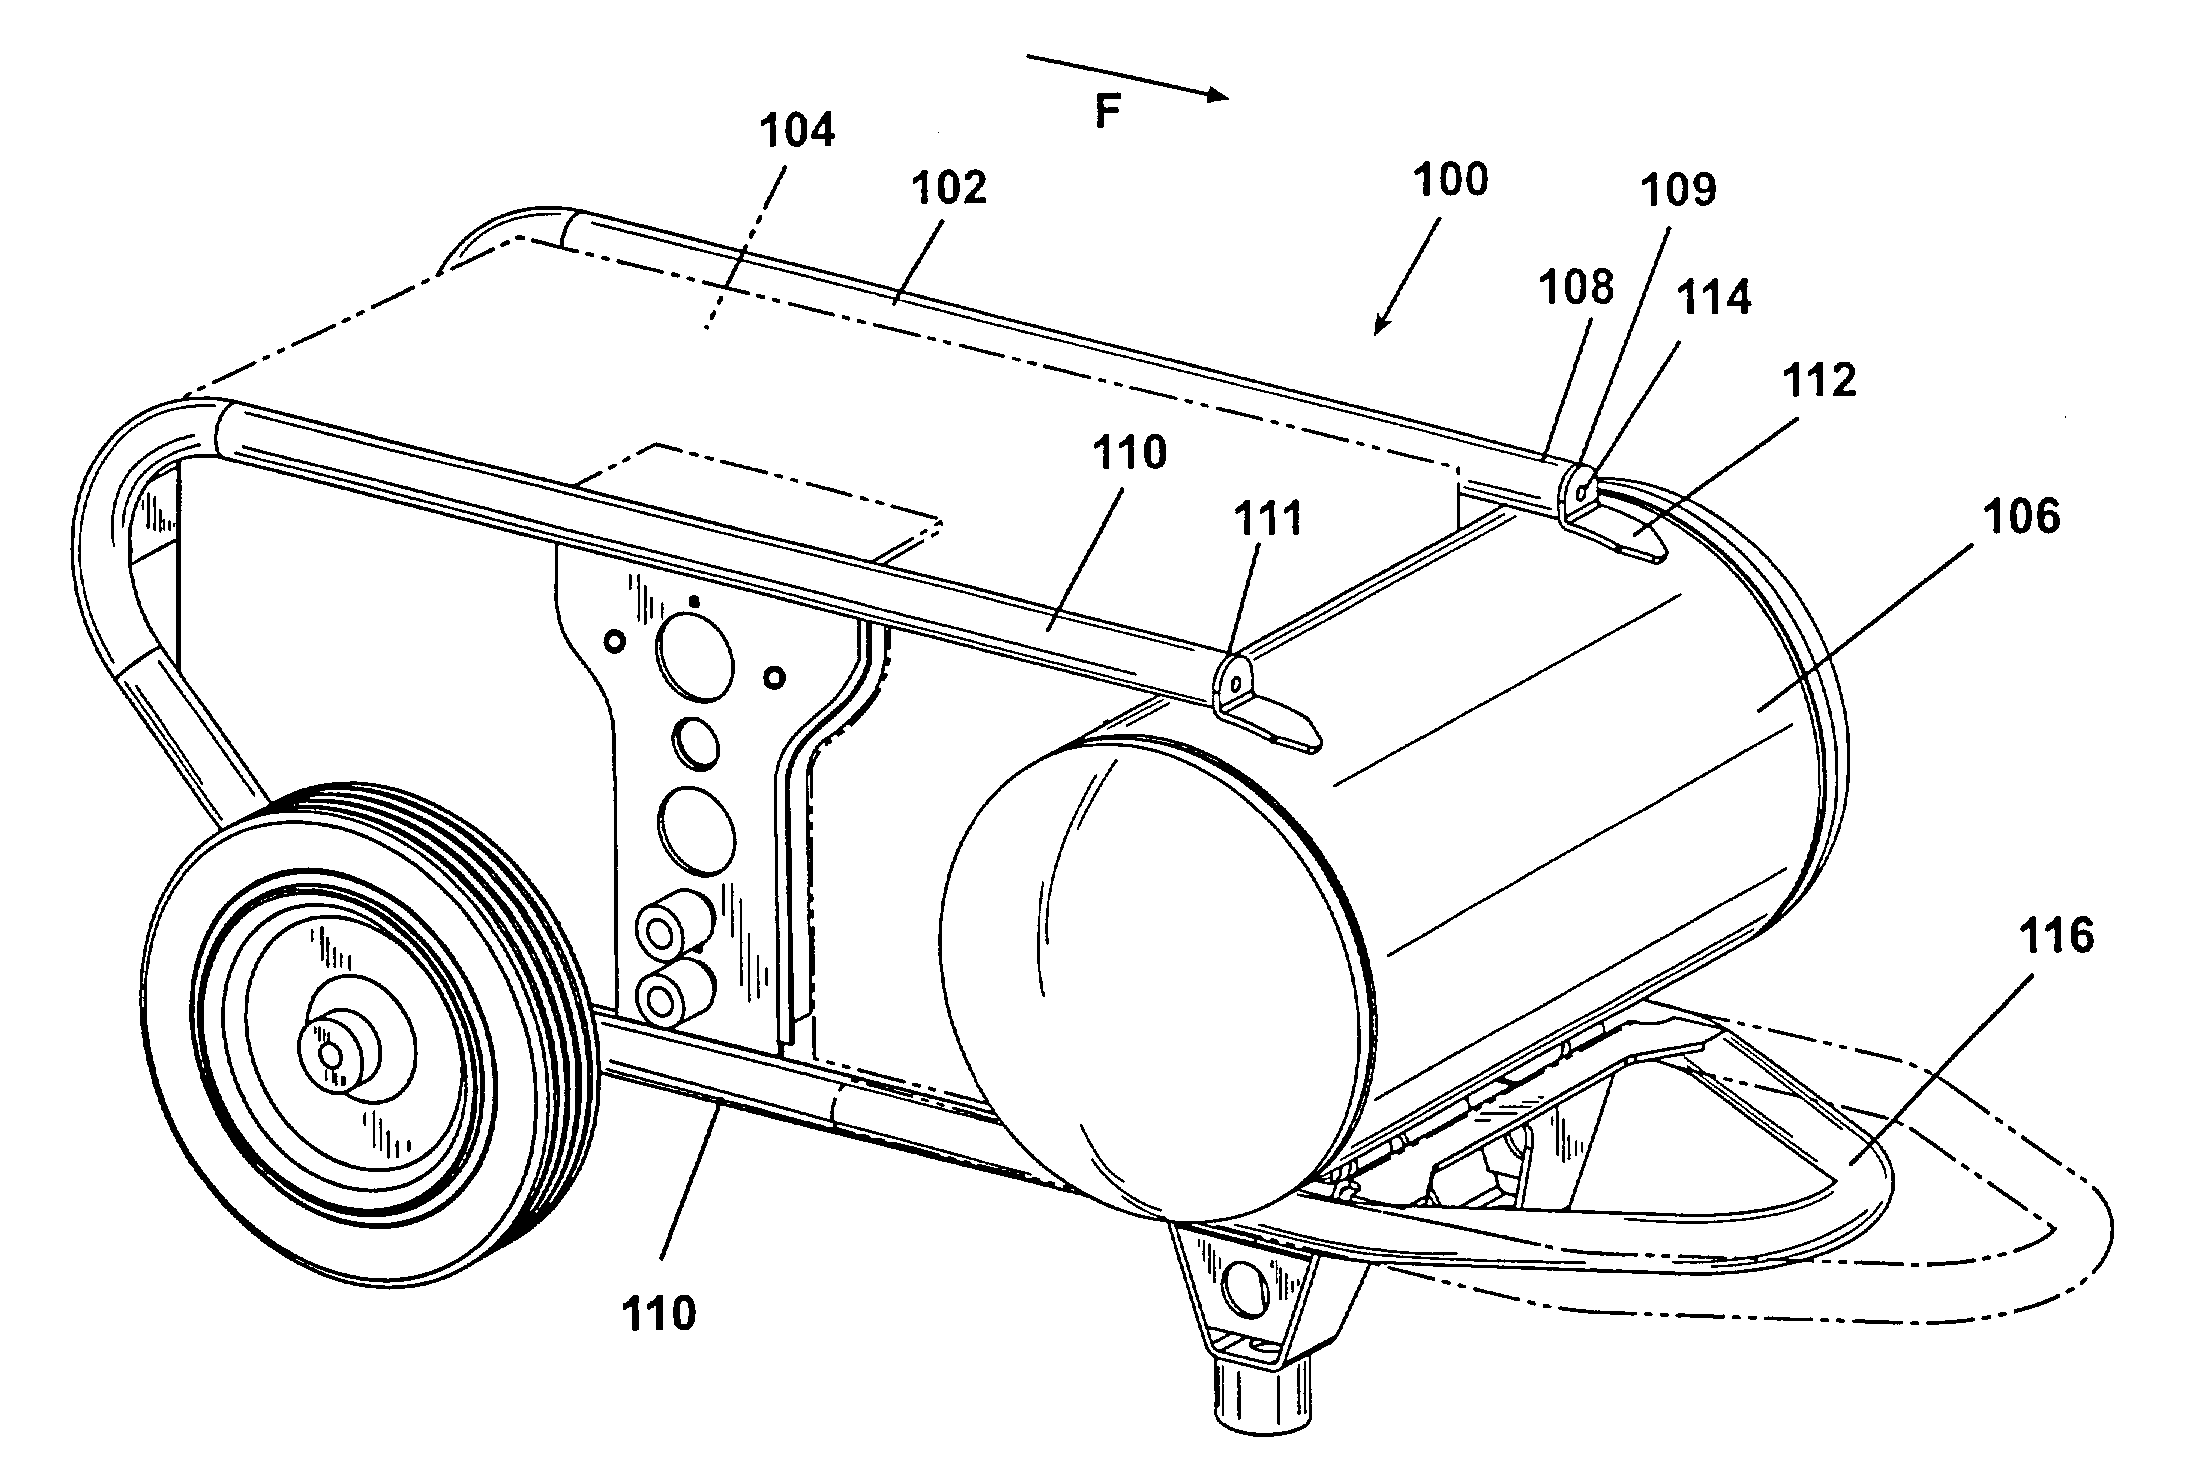 Support structure for a portable air compressor